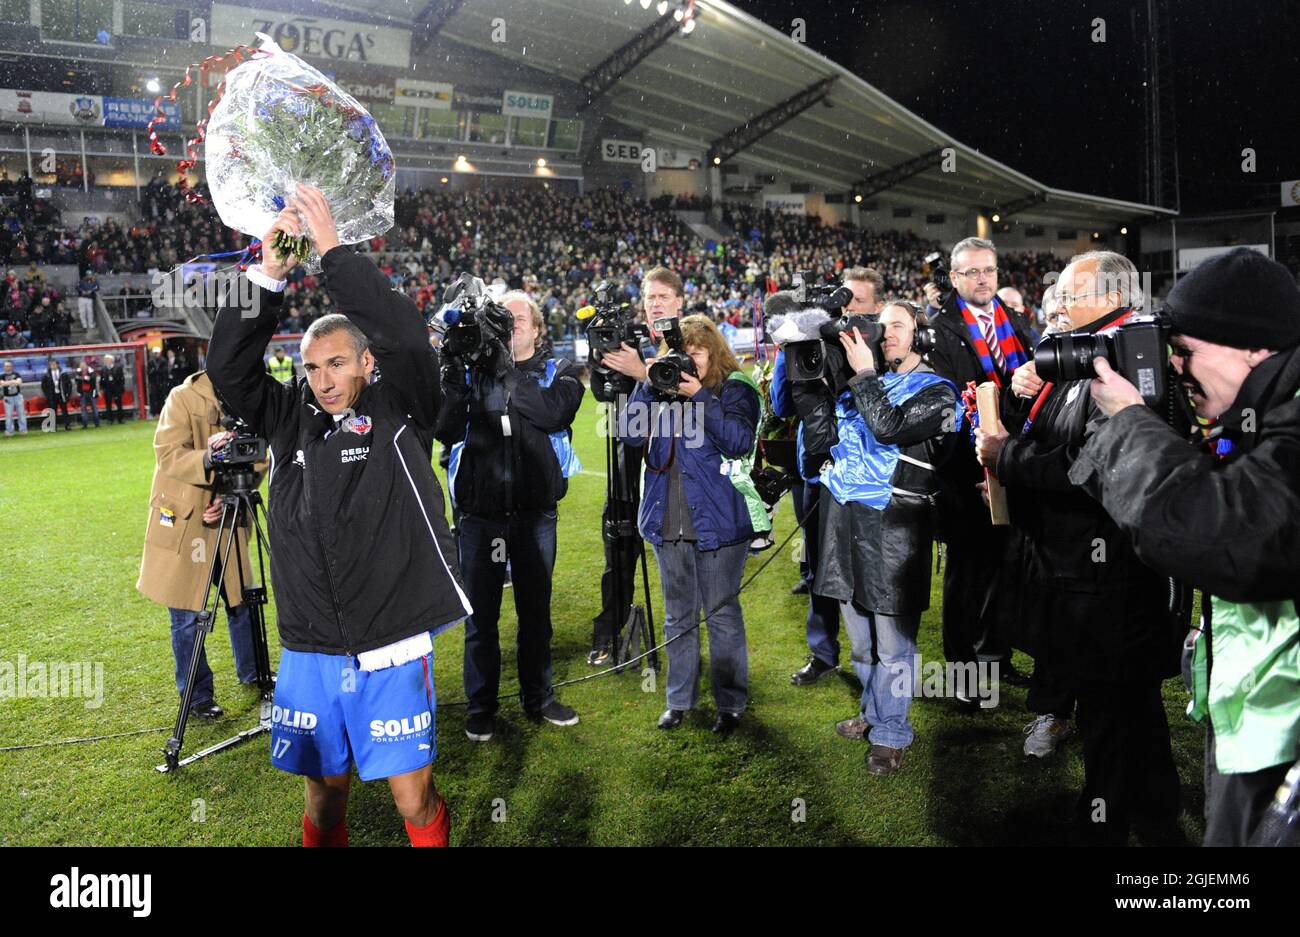 Flytte skyld baseball Henrik Larsson of Helsingborg bids an emotional farewell to fans. Larsson  is to retire at the